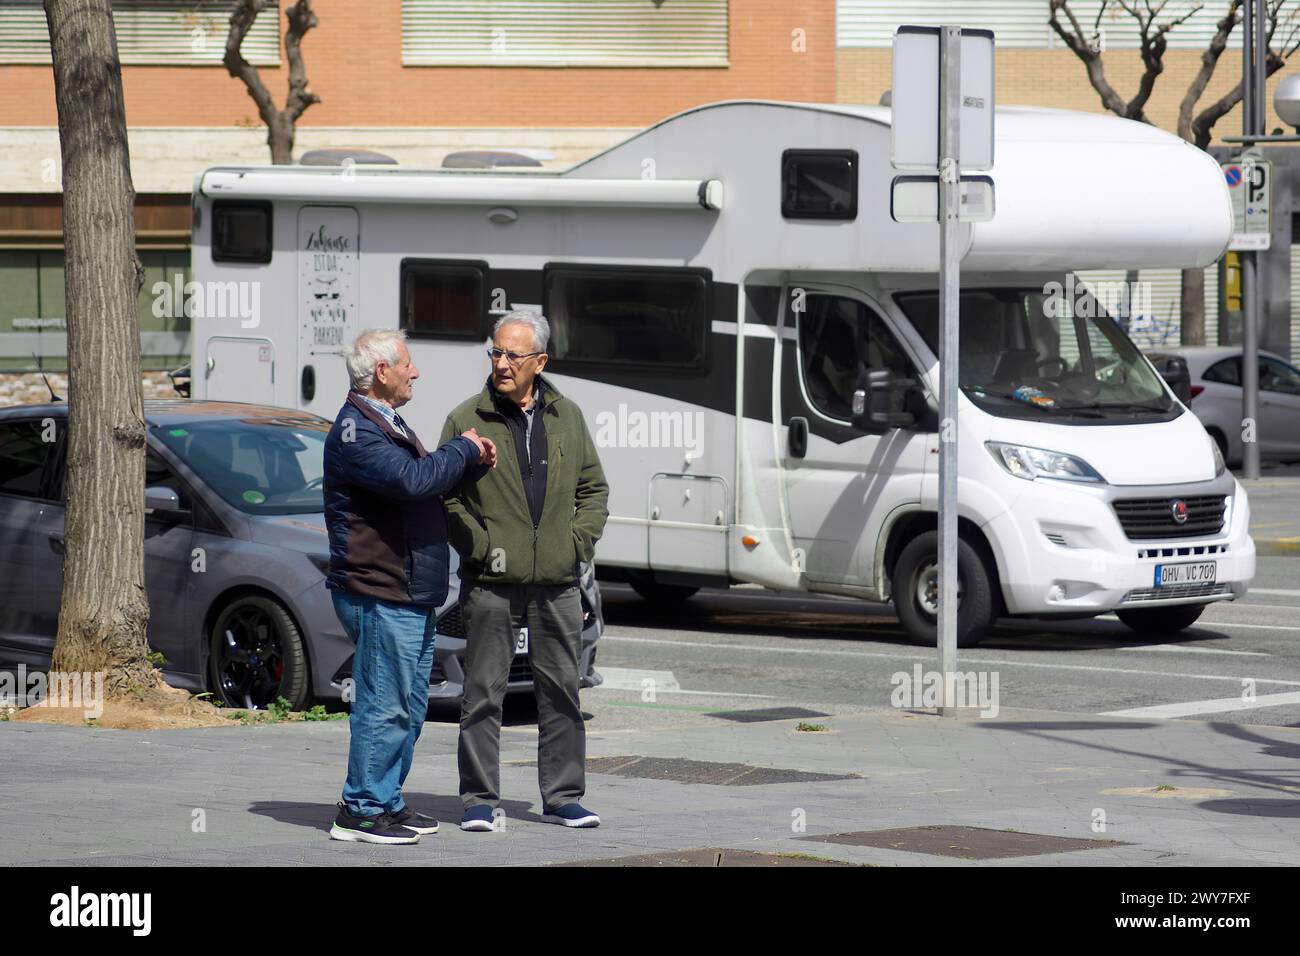 Tarragona, Spain - April 4, 2024: On a sunny day in Tarragona, two people stop to chat near a white caravan, capturing an everyday moment. Stock Photo